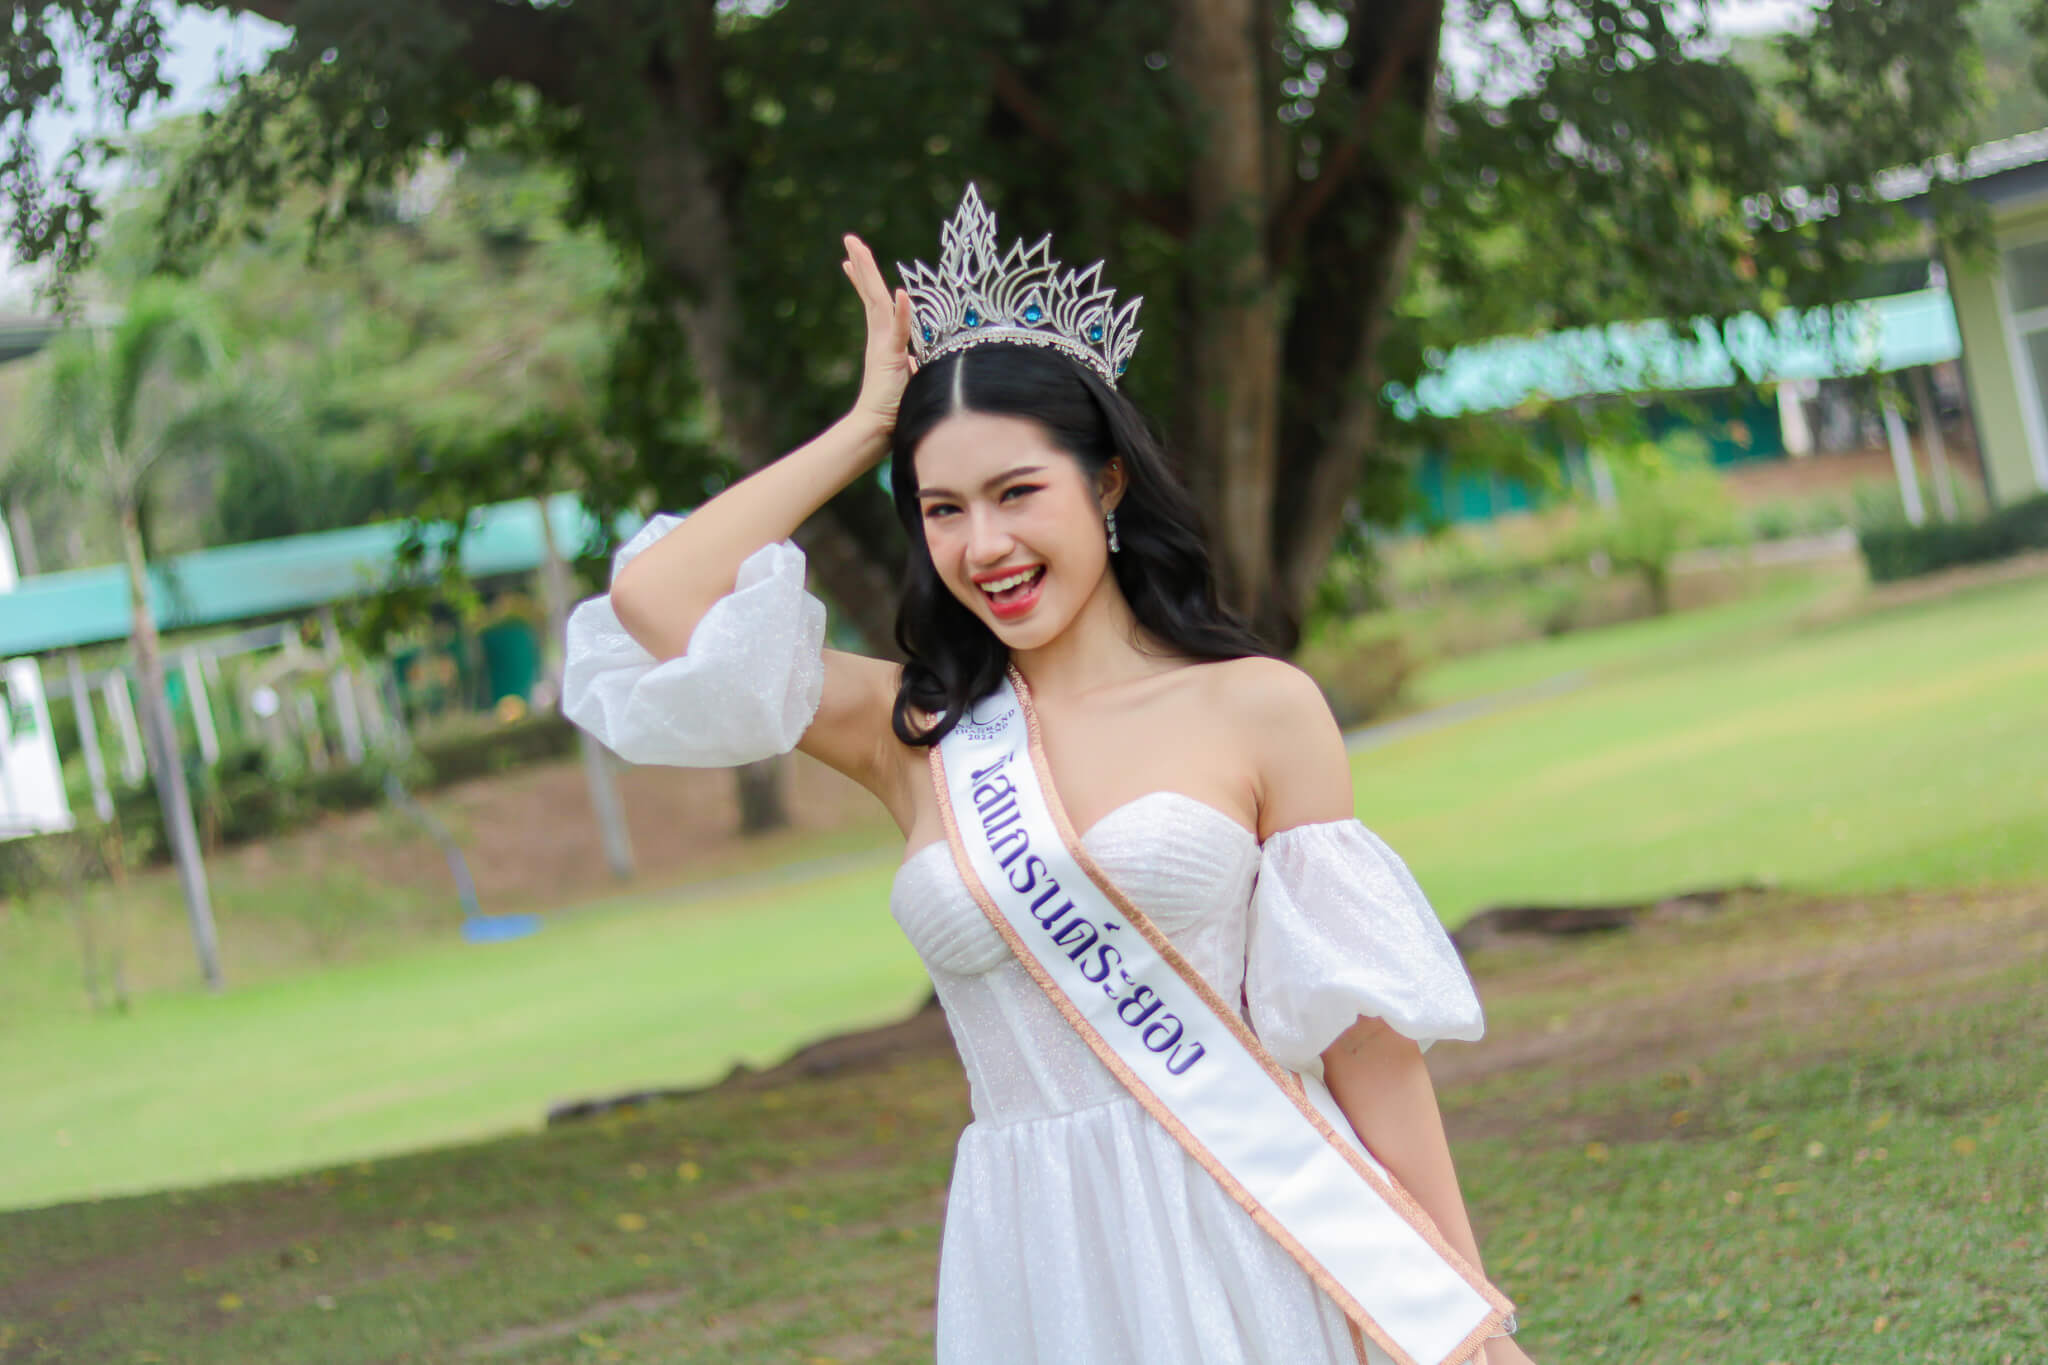 Cherry crowned Miss Grand Rayong